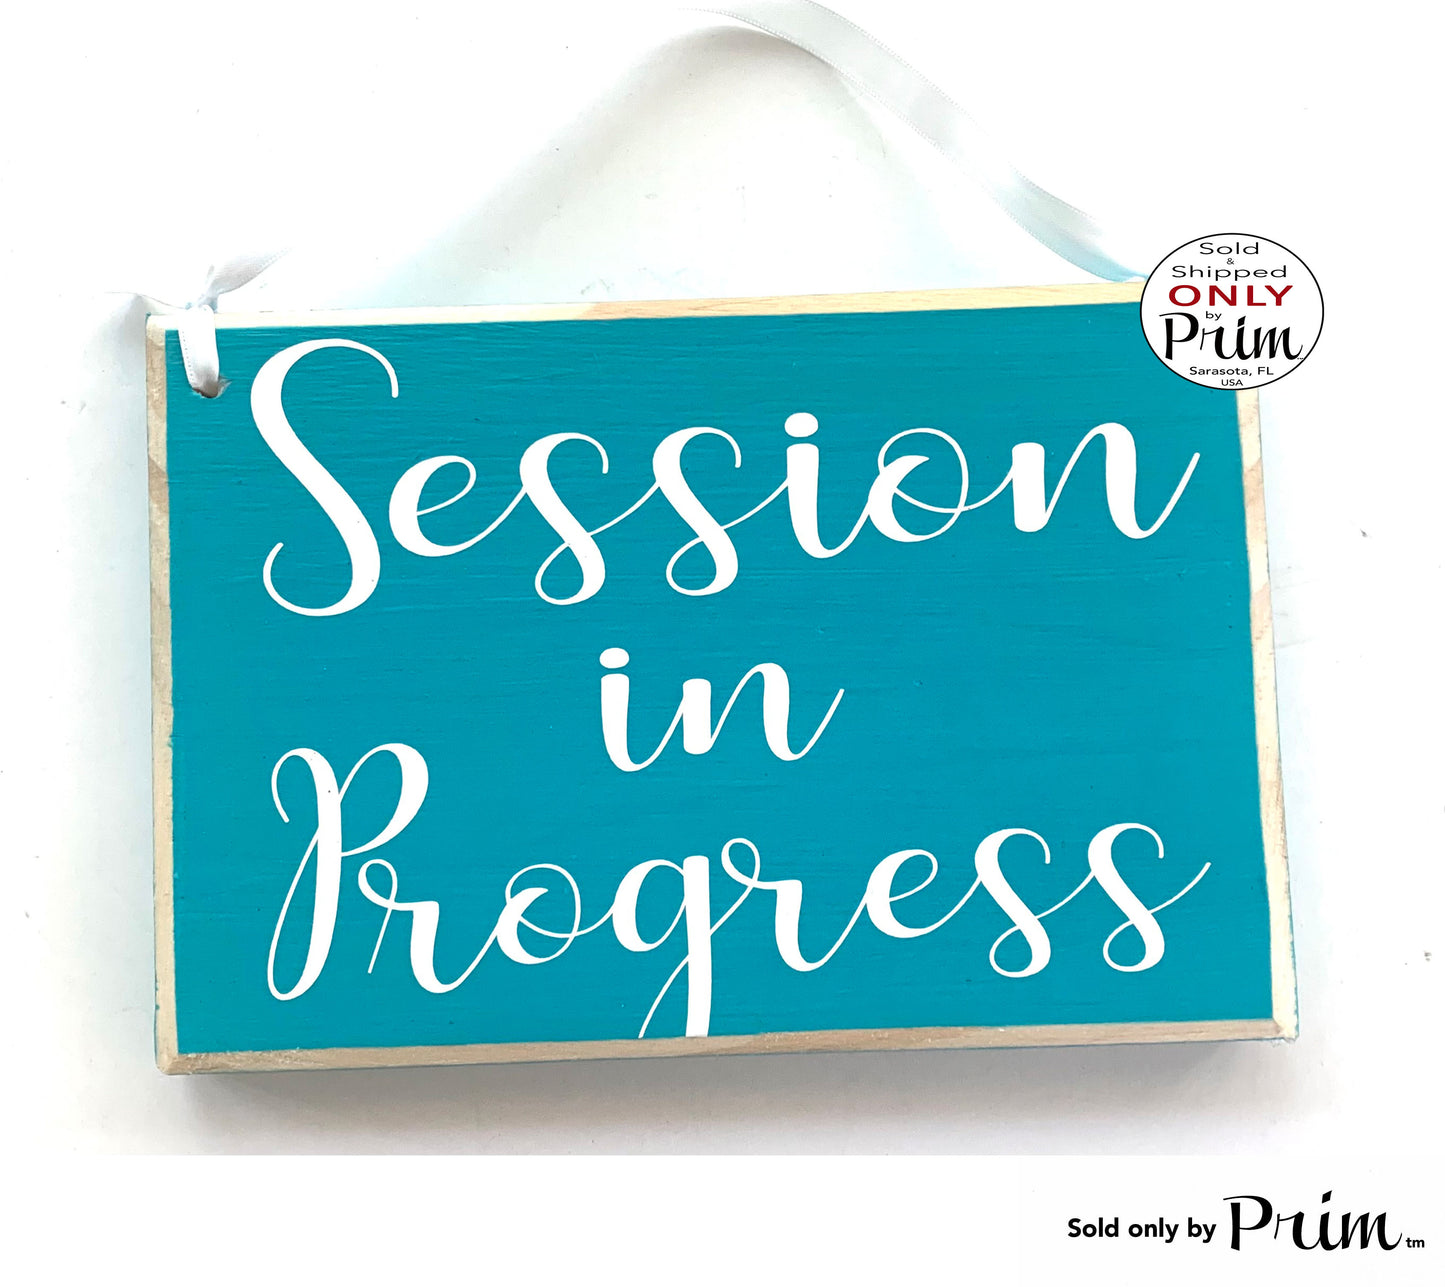 8x6 Session in Progress Custom Wood Sign Busy Please Do Not Disturb Welcome Meeting Quiet Work Cubicle Office Conference Wall Door Plaque Designs by Prim